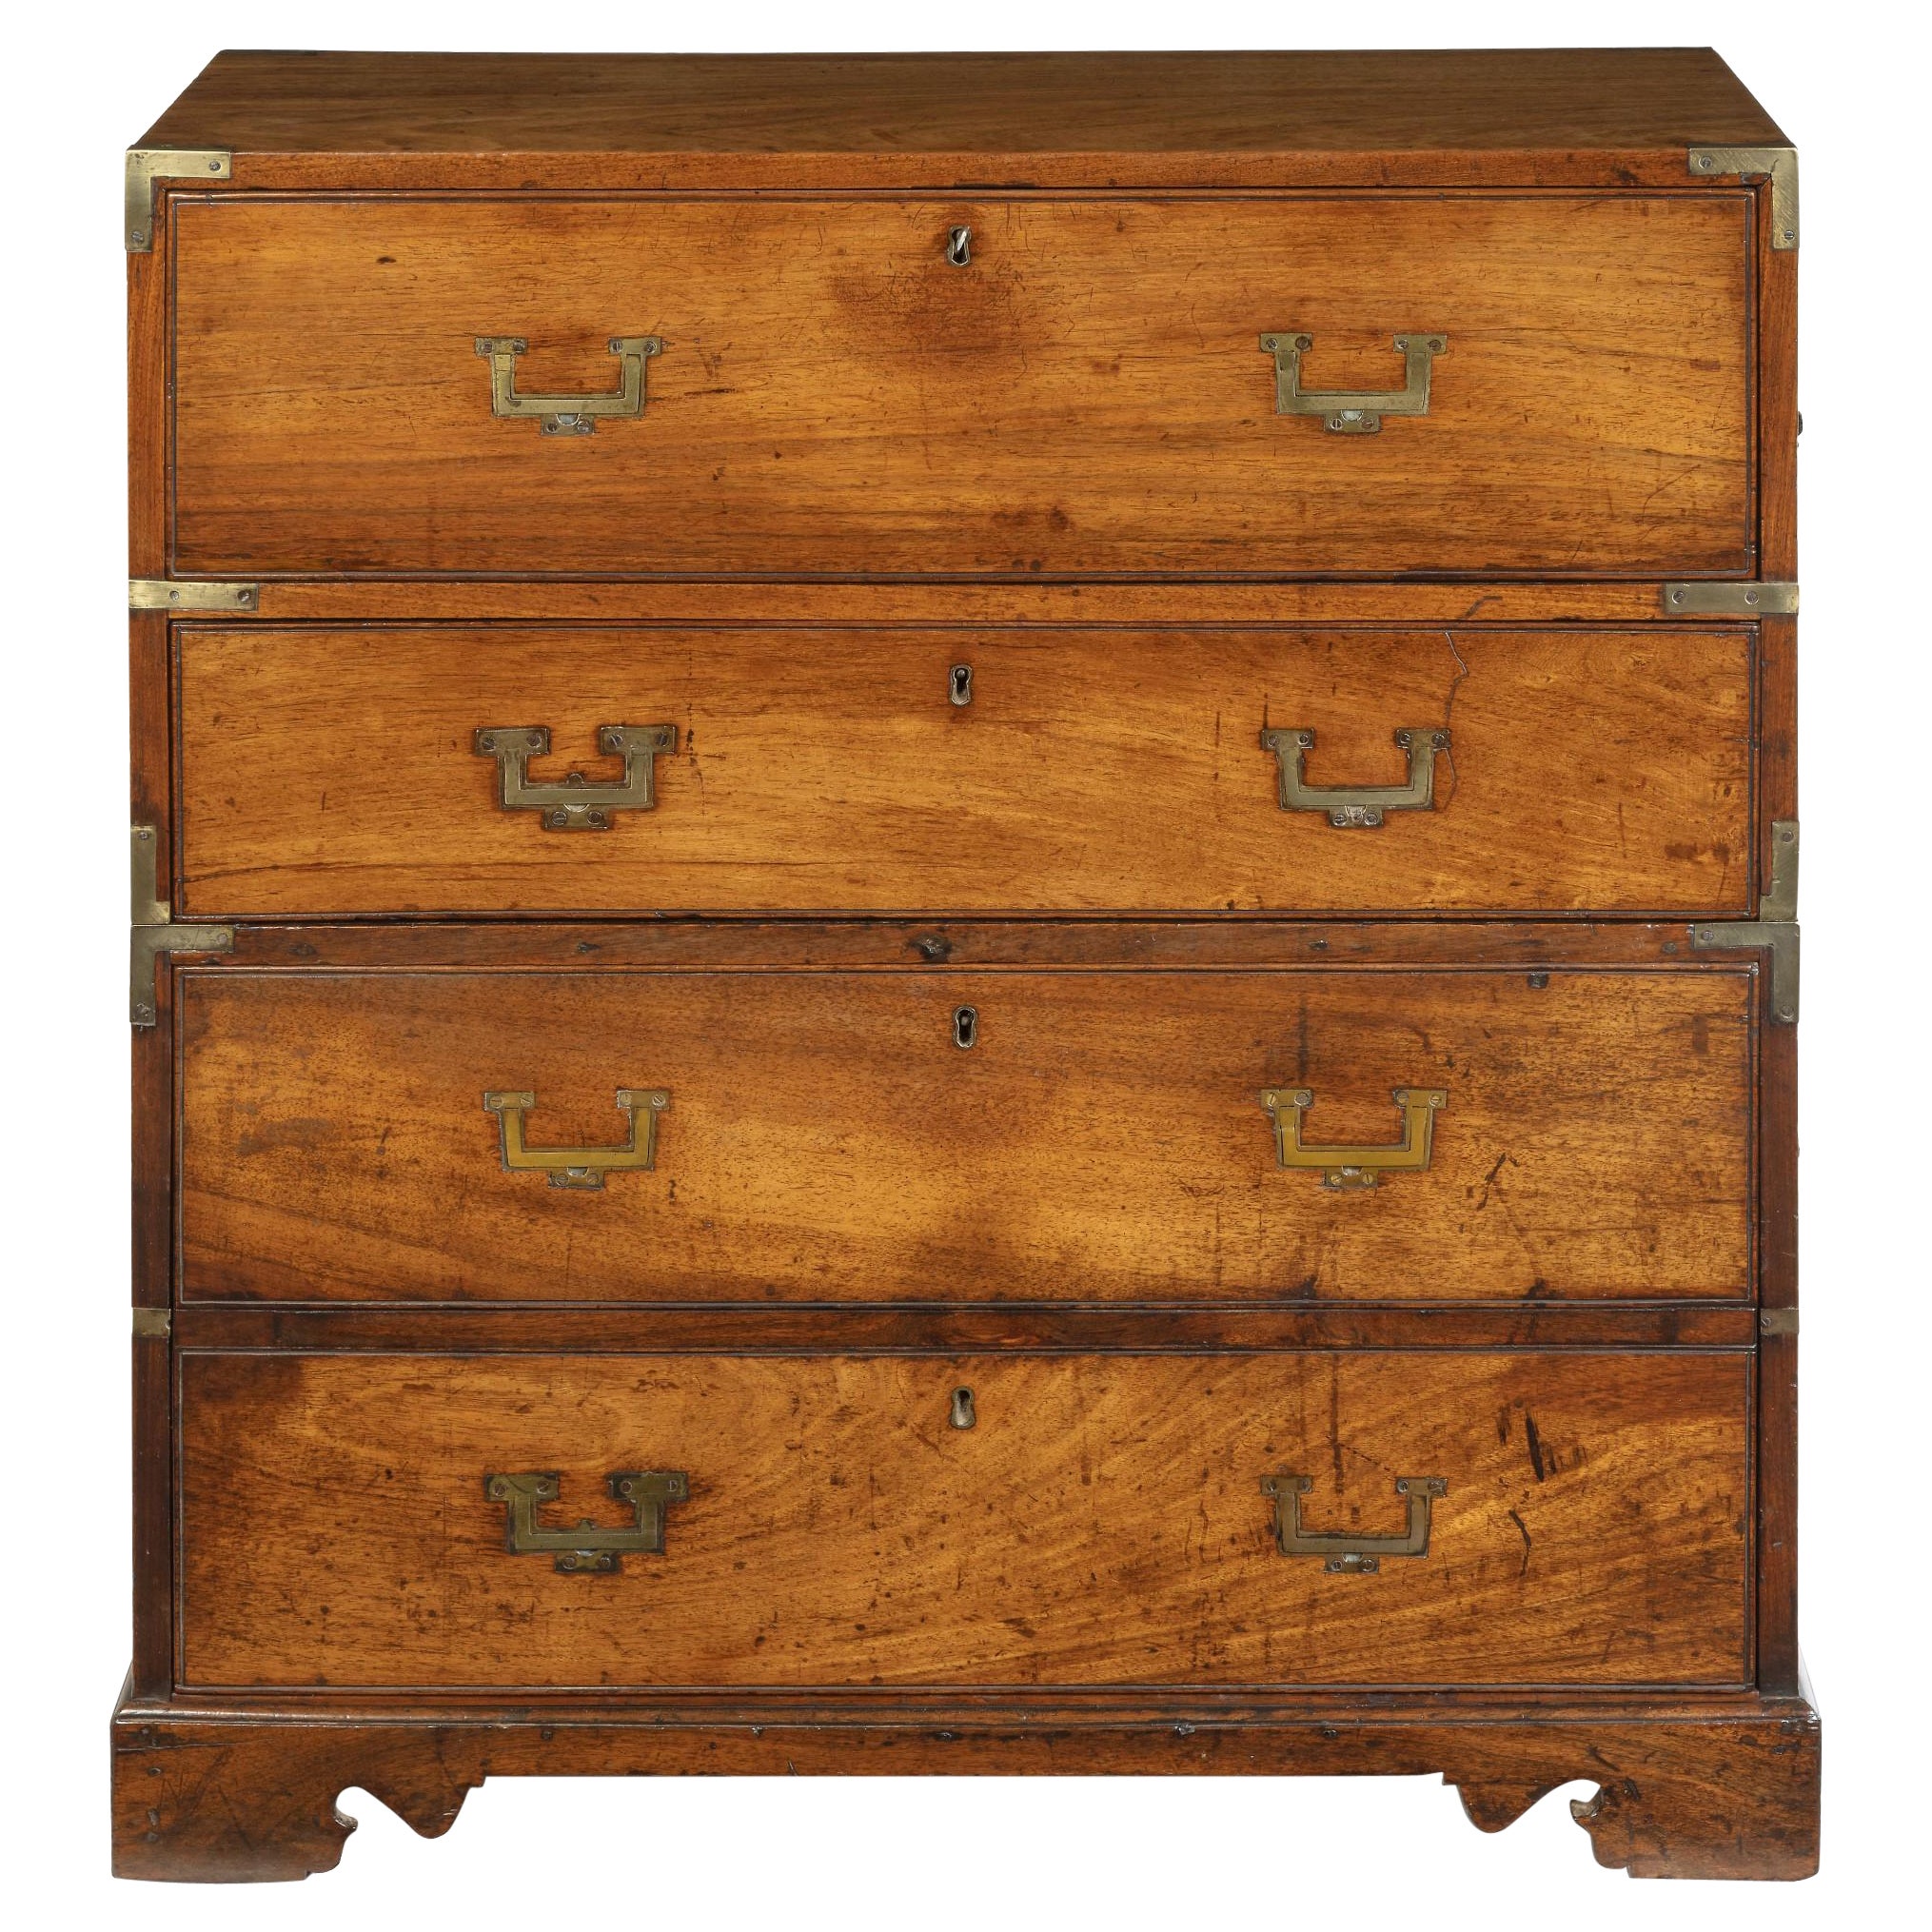 Anglo-Chinese Hardwood Naval Officer’s Campaign Chest